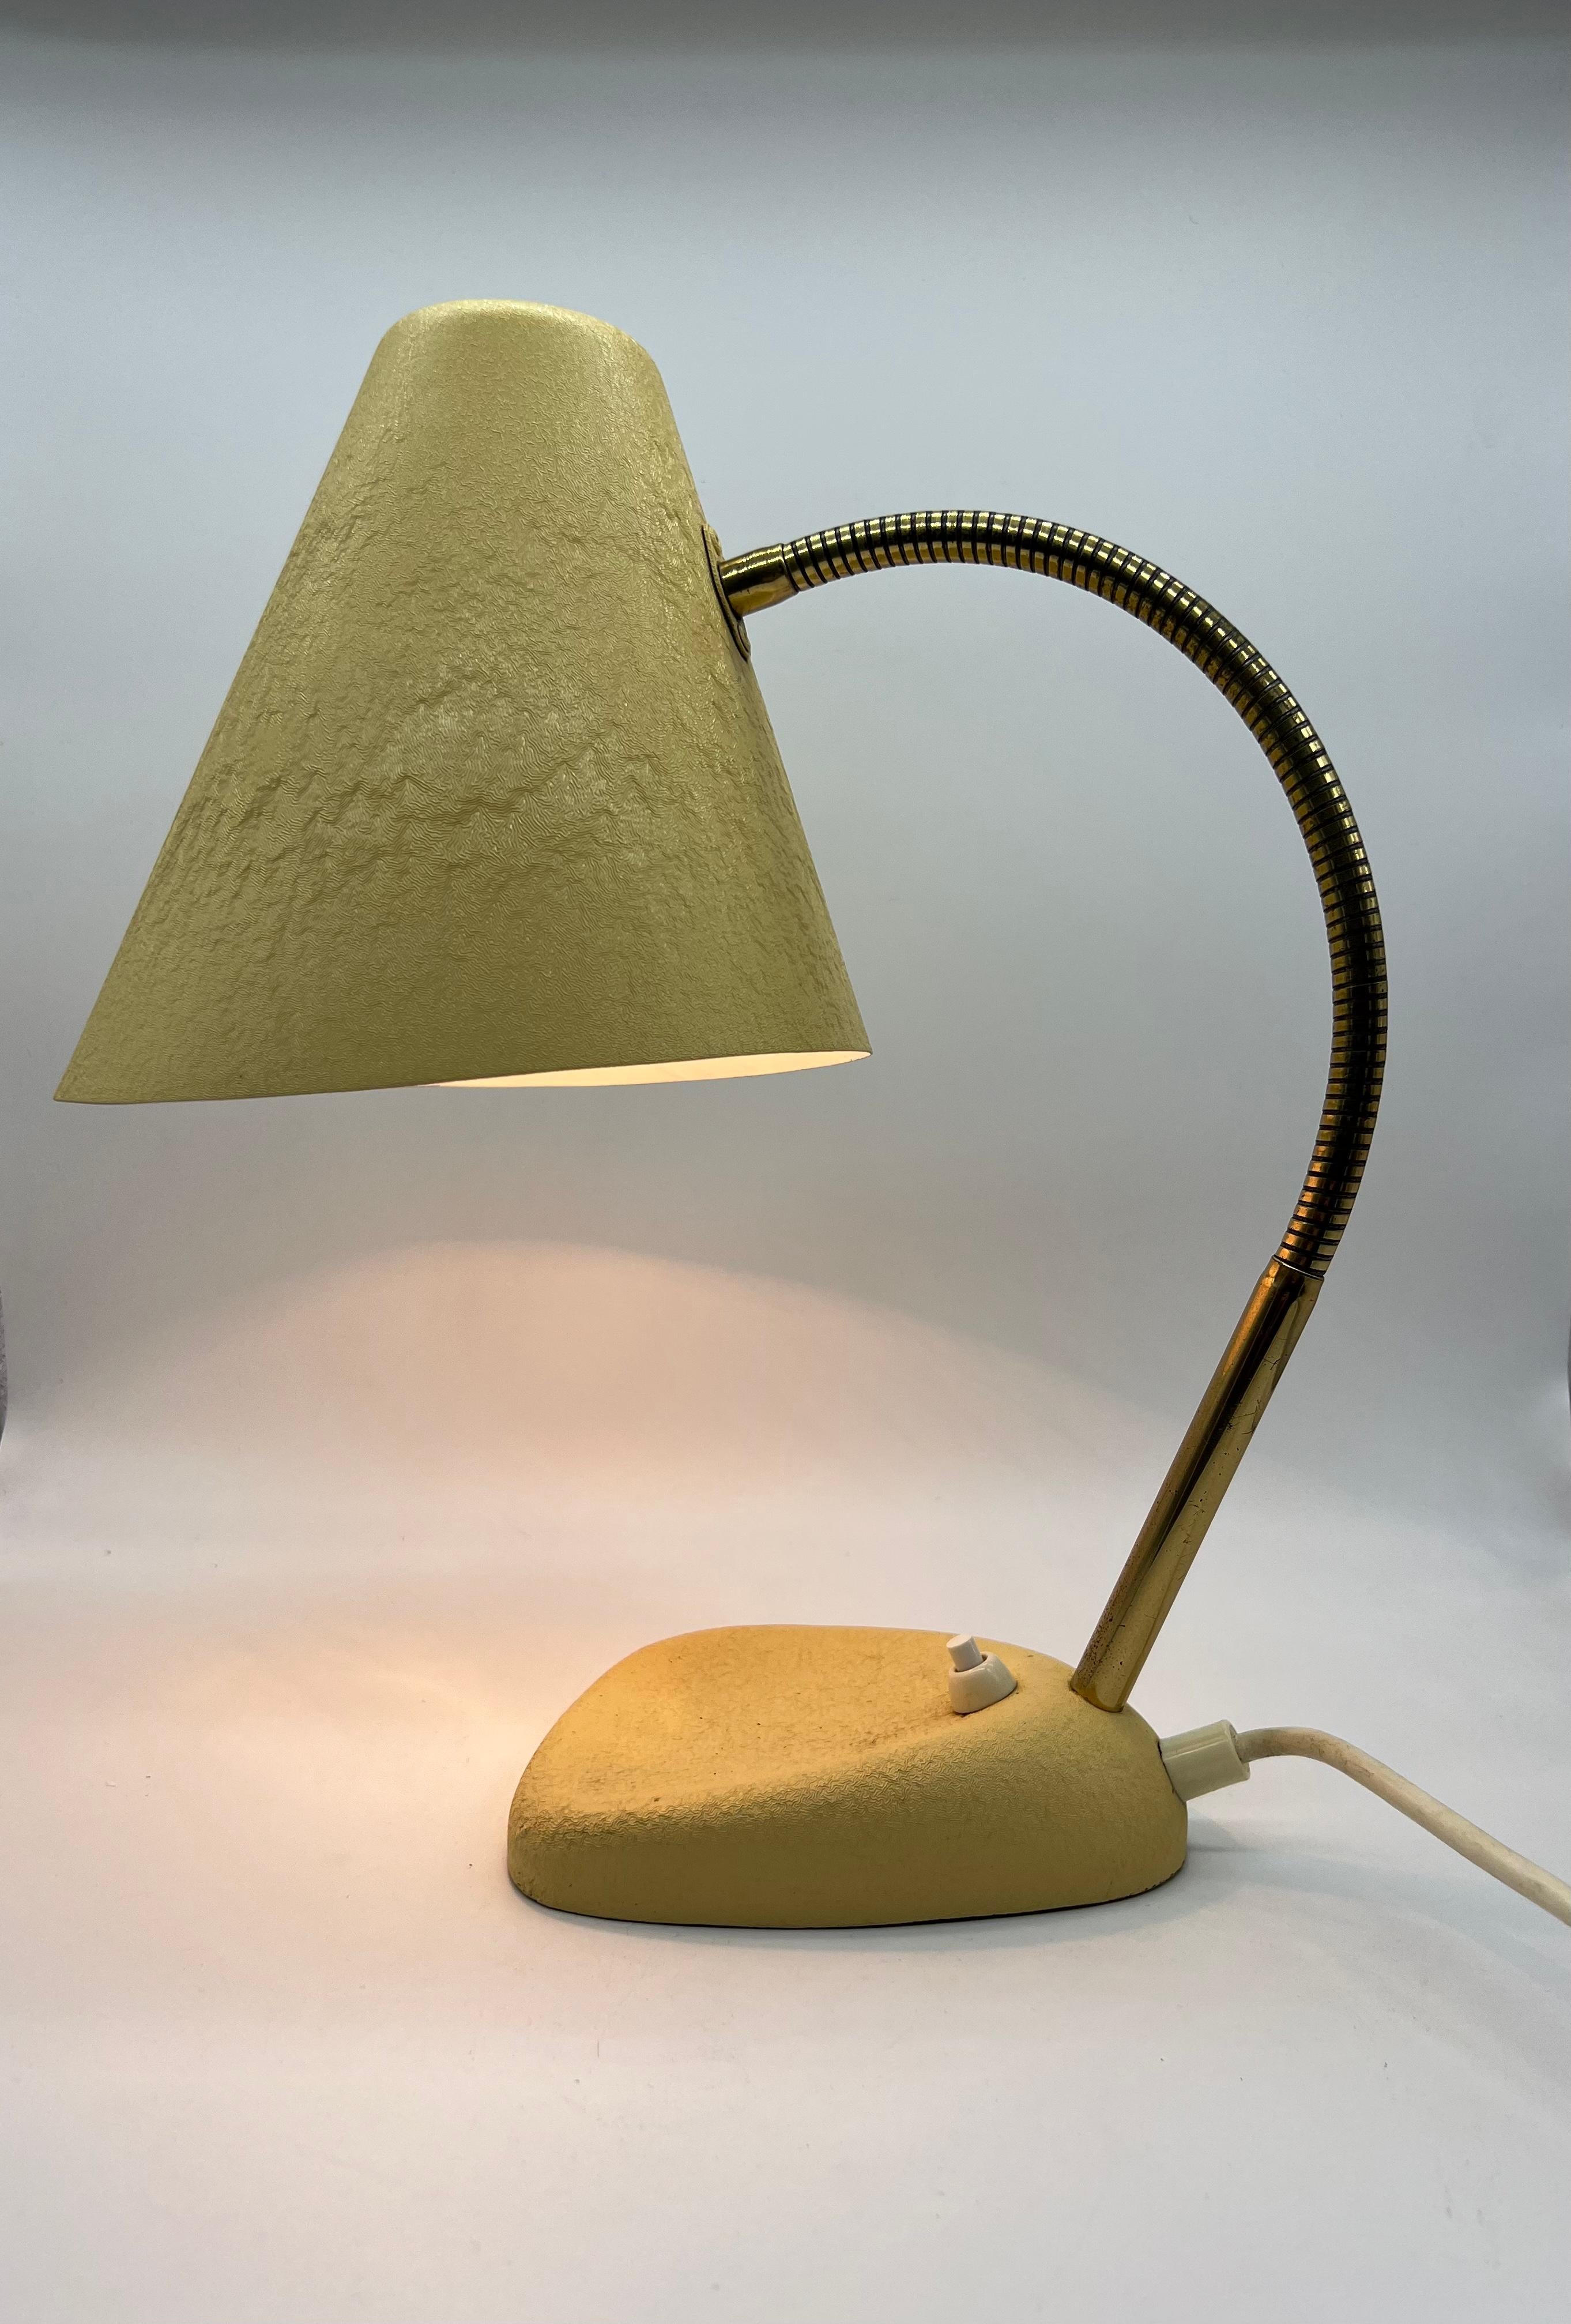 Yellow Table Lamp with Shrink Varnish and Movable Shade, Mid-20th Century For Sale 2